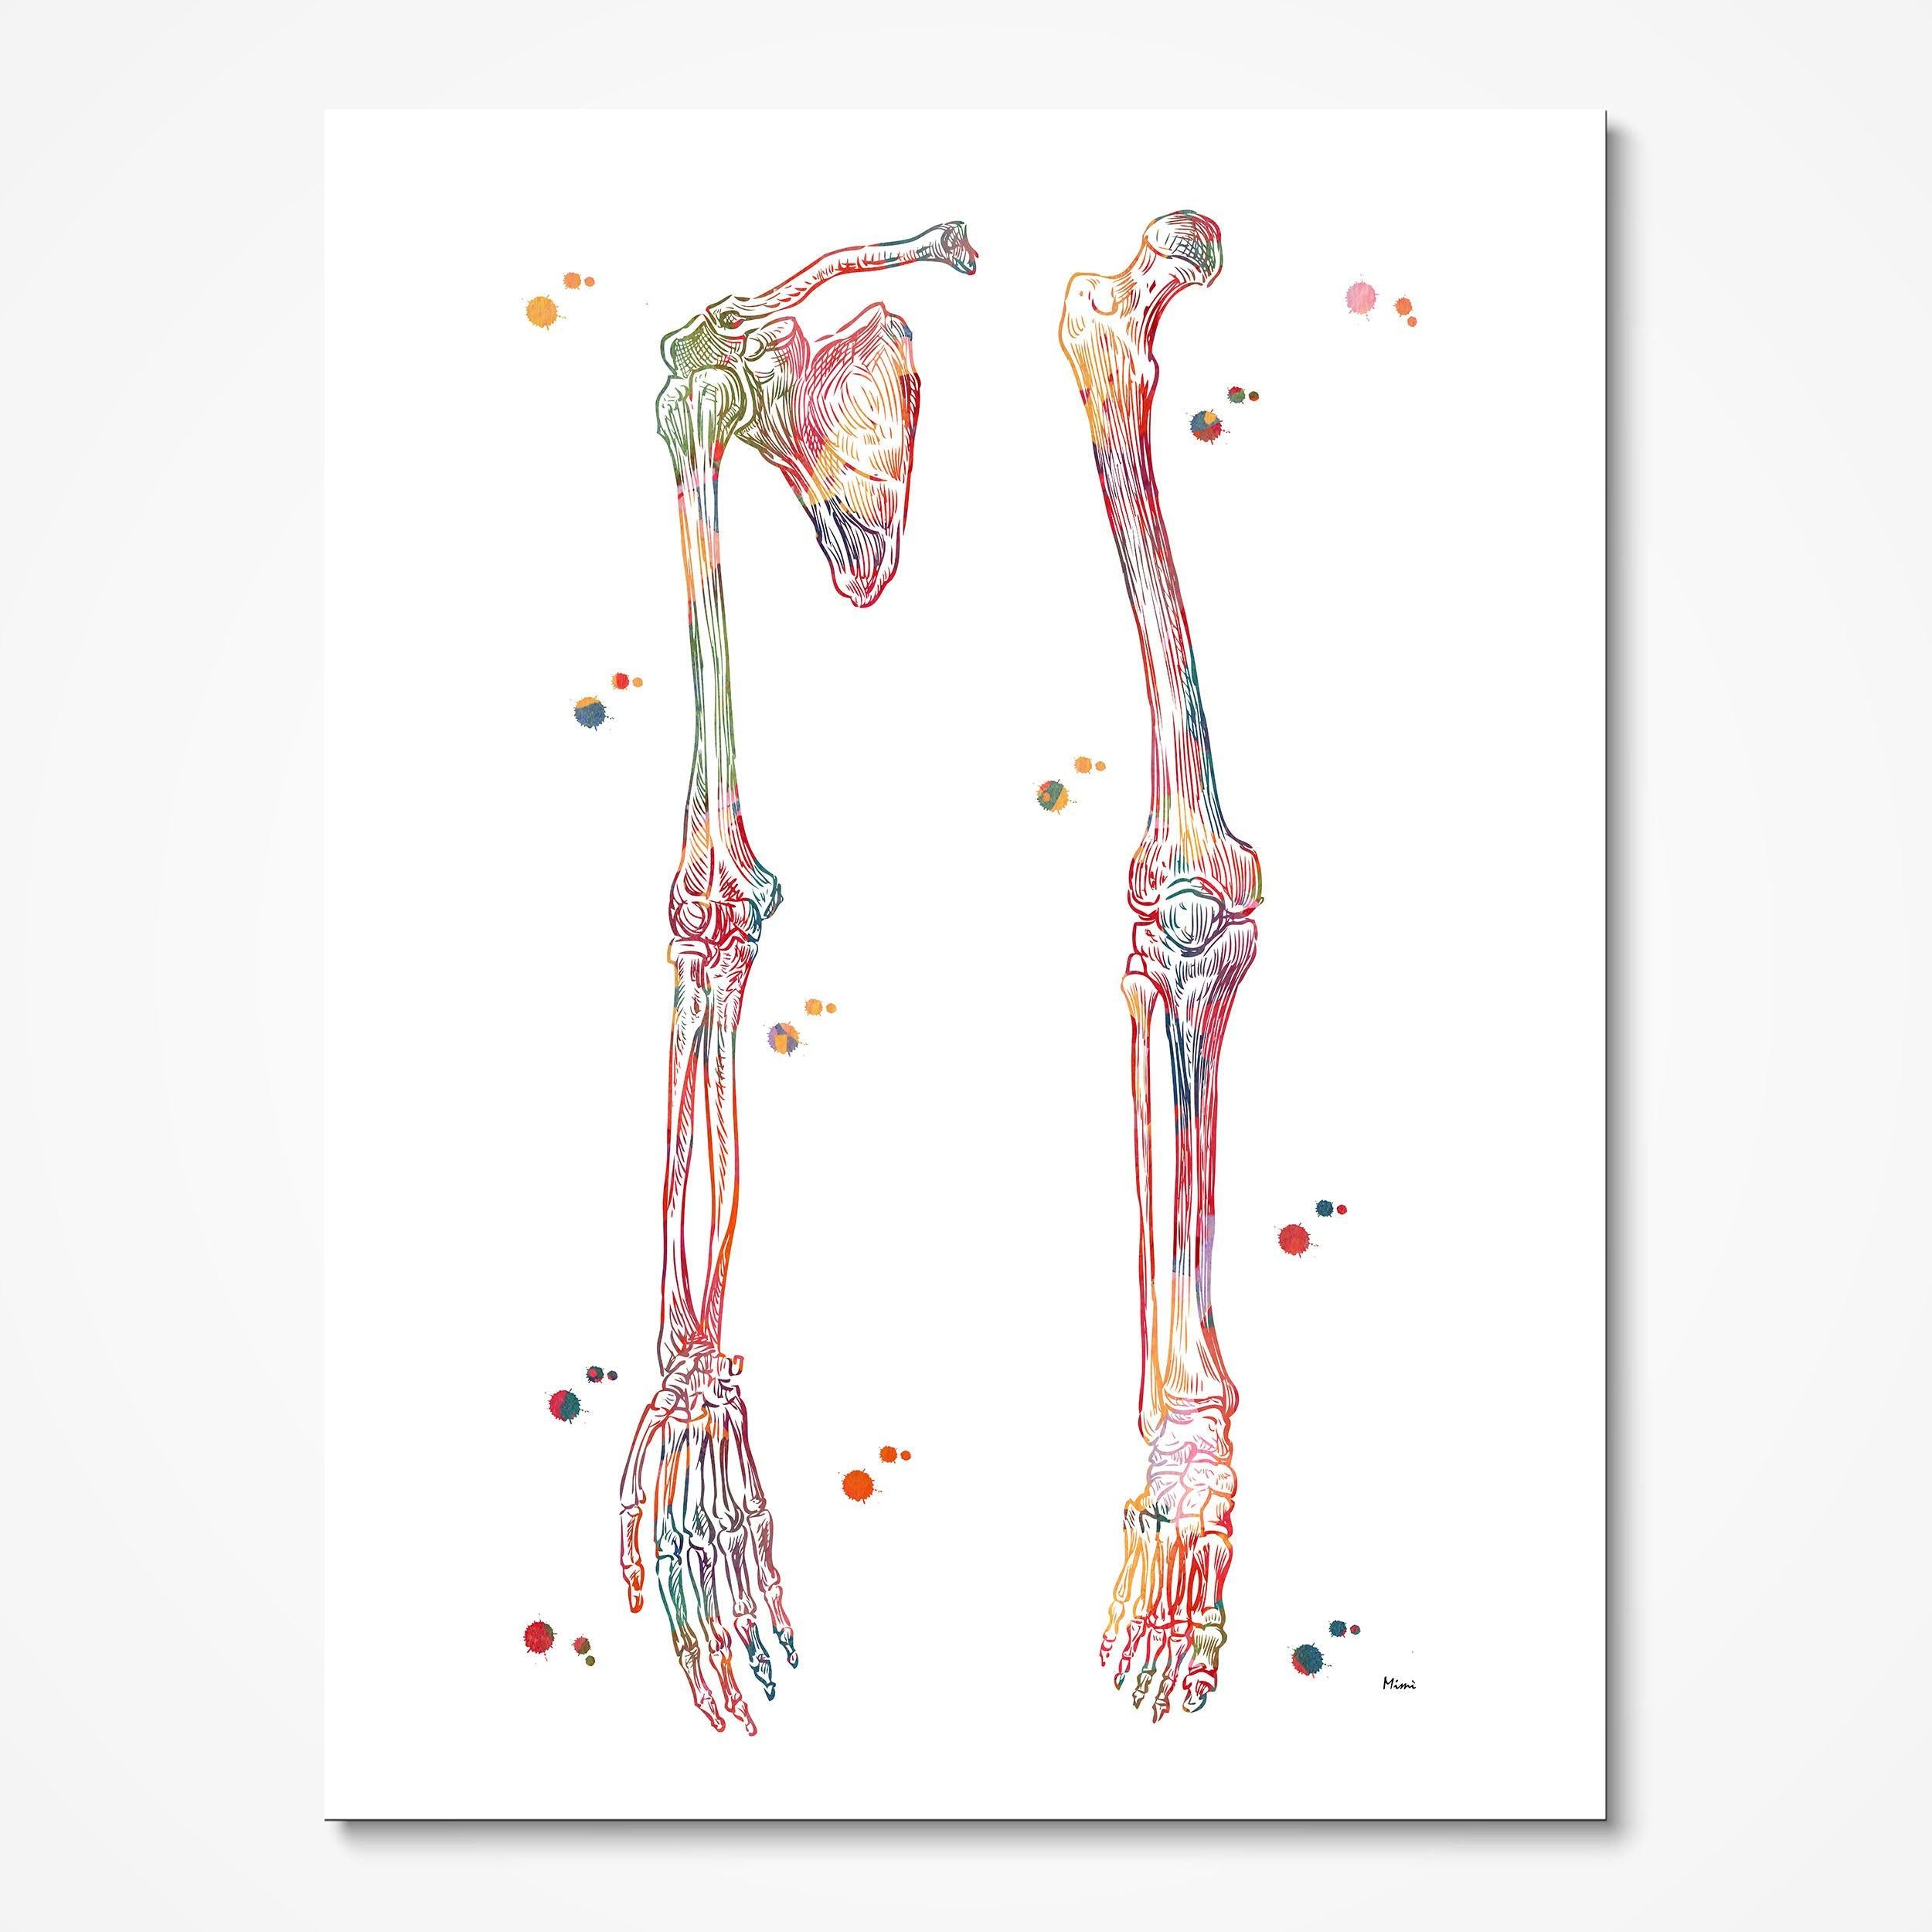 Upper Limbs And Leg Anatomy Art Human Bones With Ligaments Skeletal System Poster